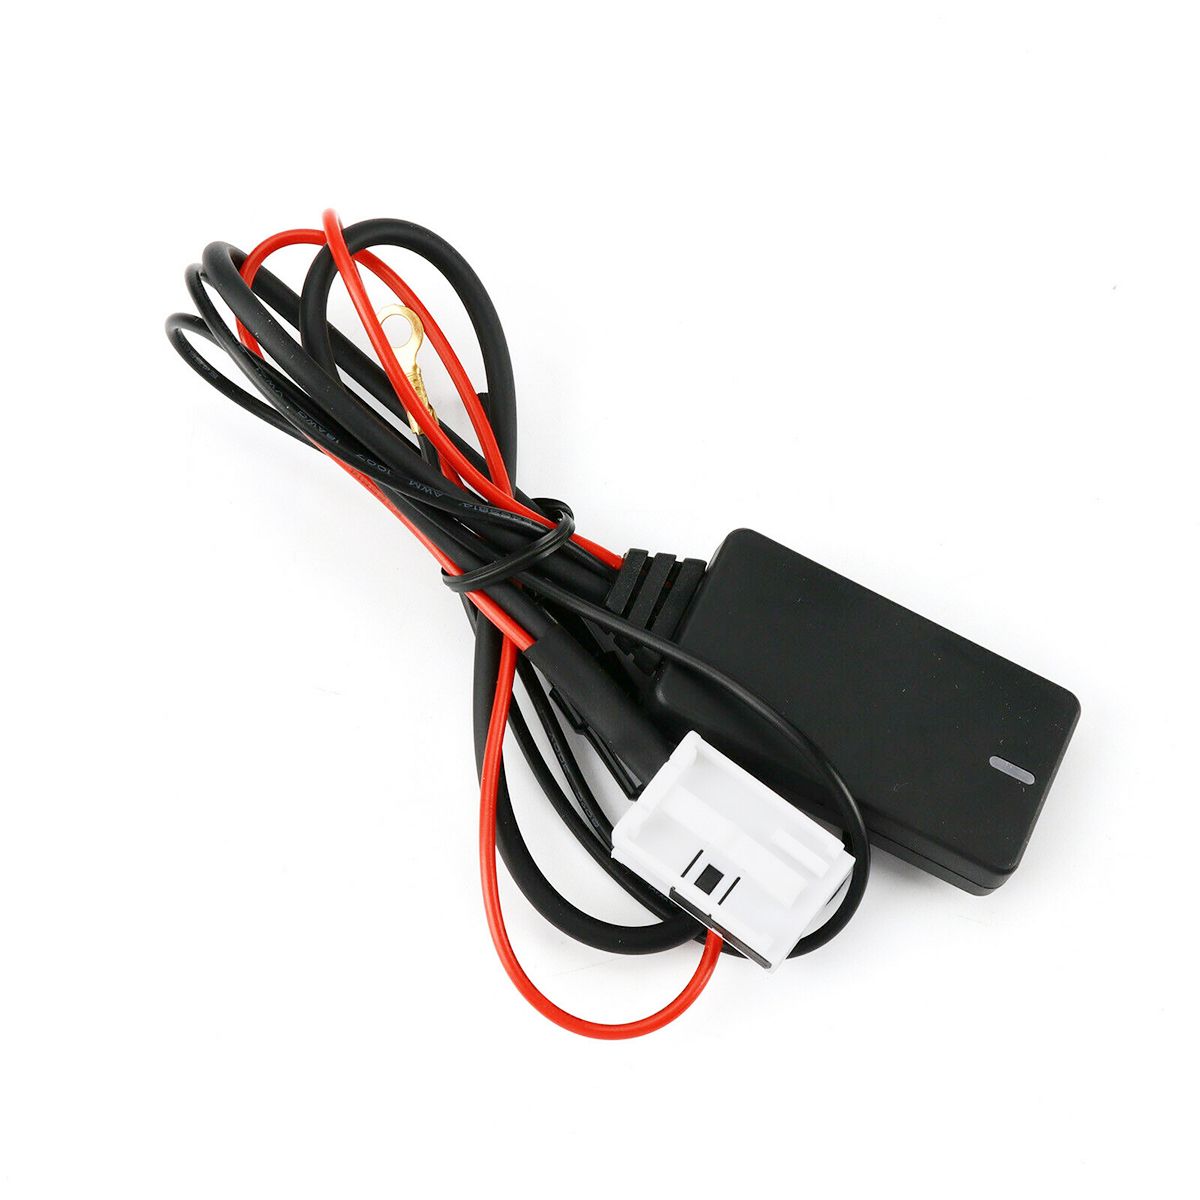 Aux-Bluetooth-Adapter-Car-MP3-Jack-Music-For-RCD-RNS-210-310-510-315-Golf-R32-1617366